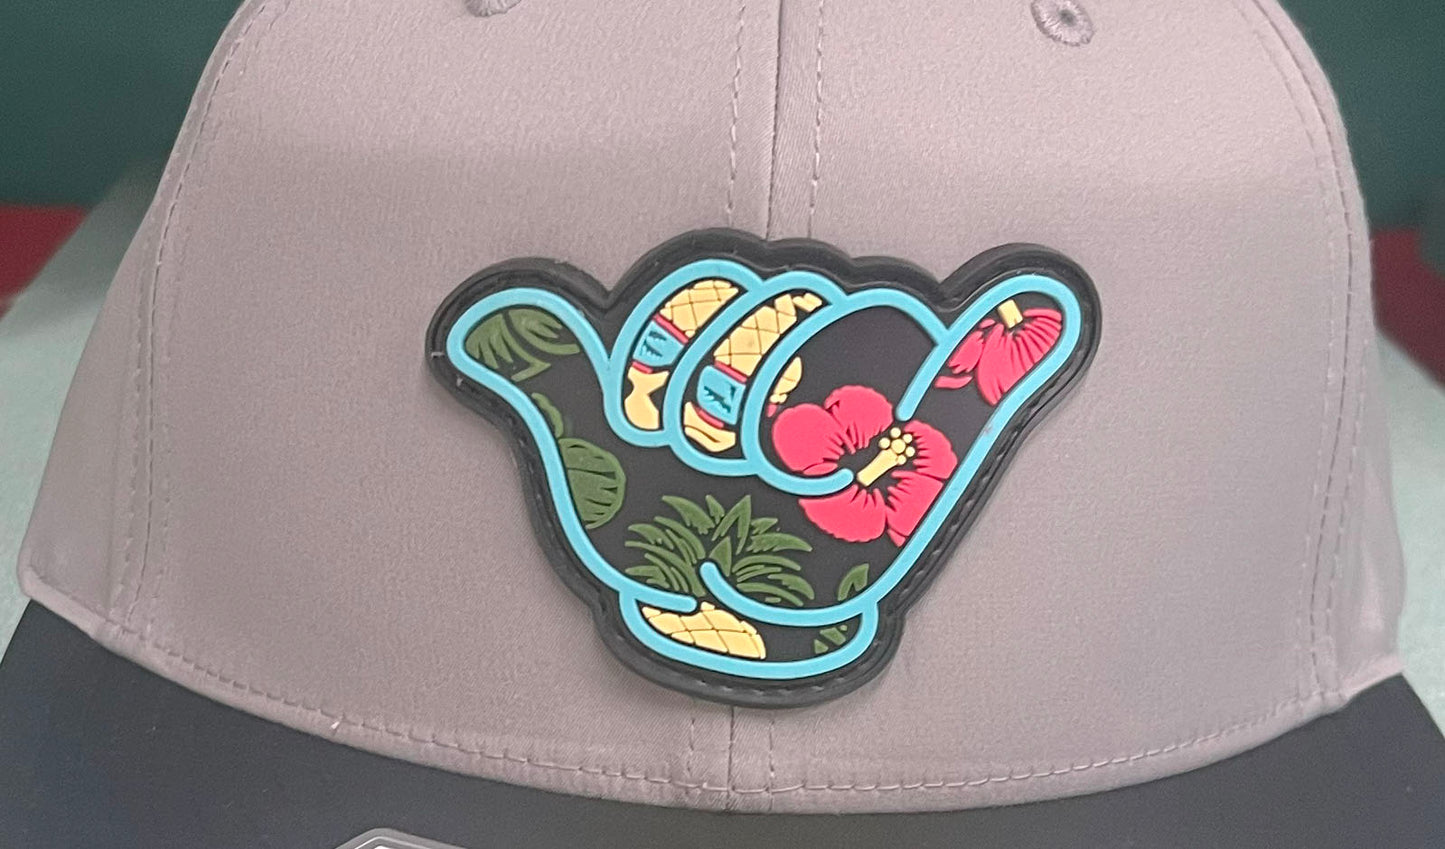 Angry Pineapple PVC Patch Hang Loose - PTS30 Gray/Black